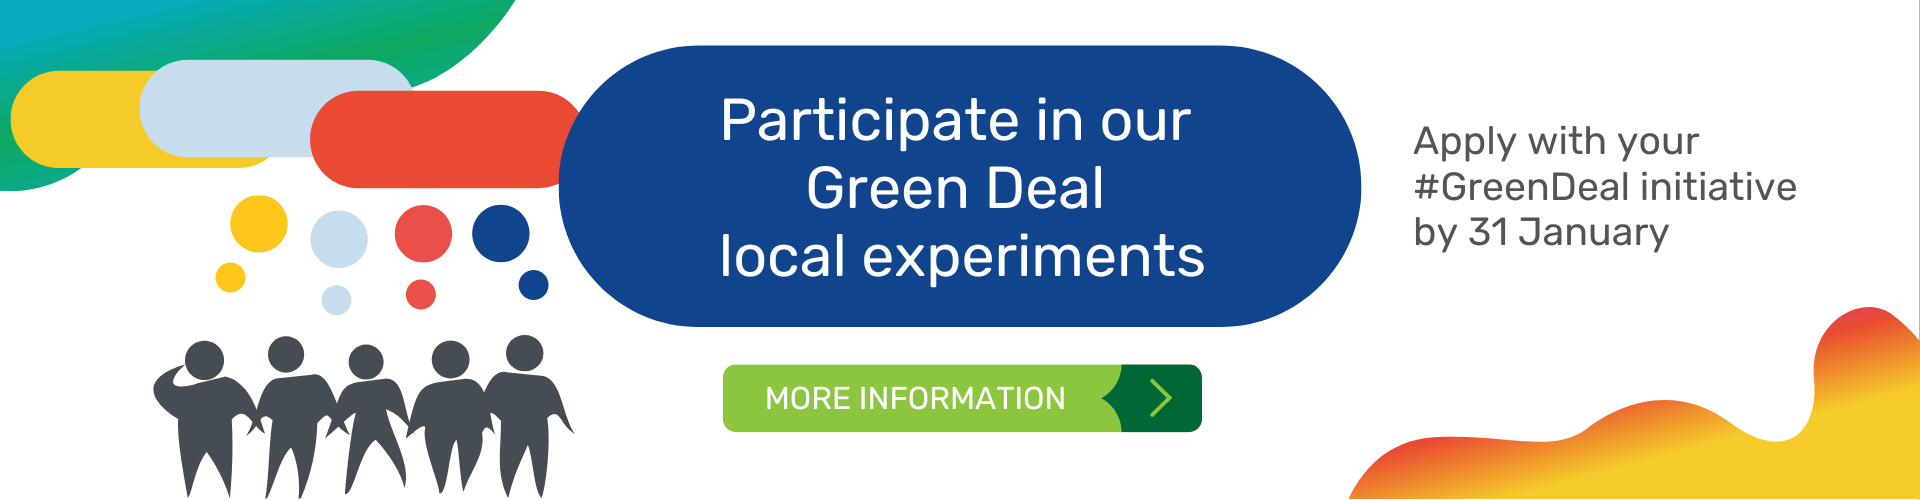 A visual saying: Apply for 22.000 Euros to create local change in support of the green deal